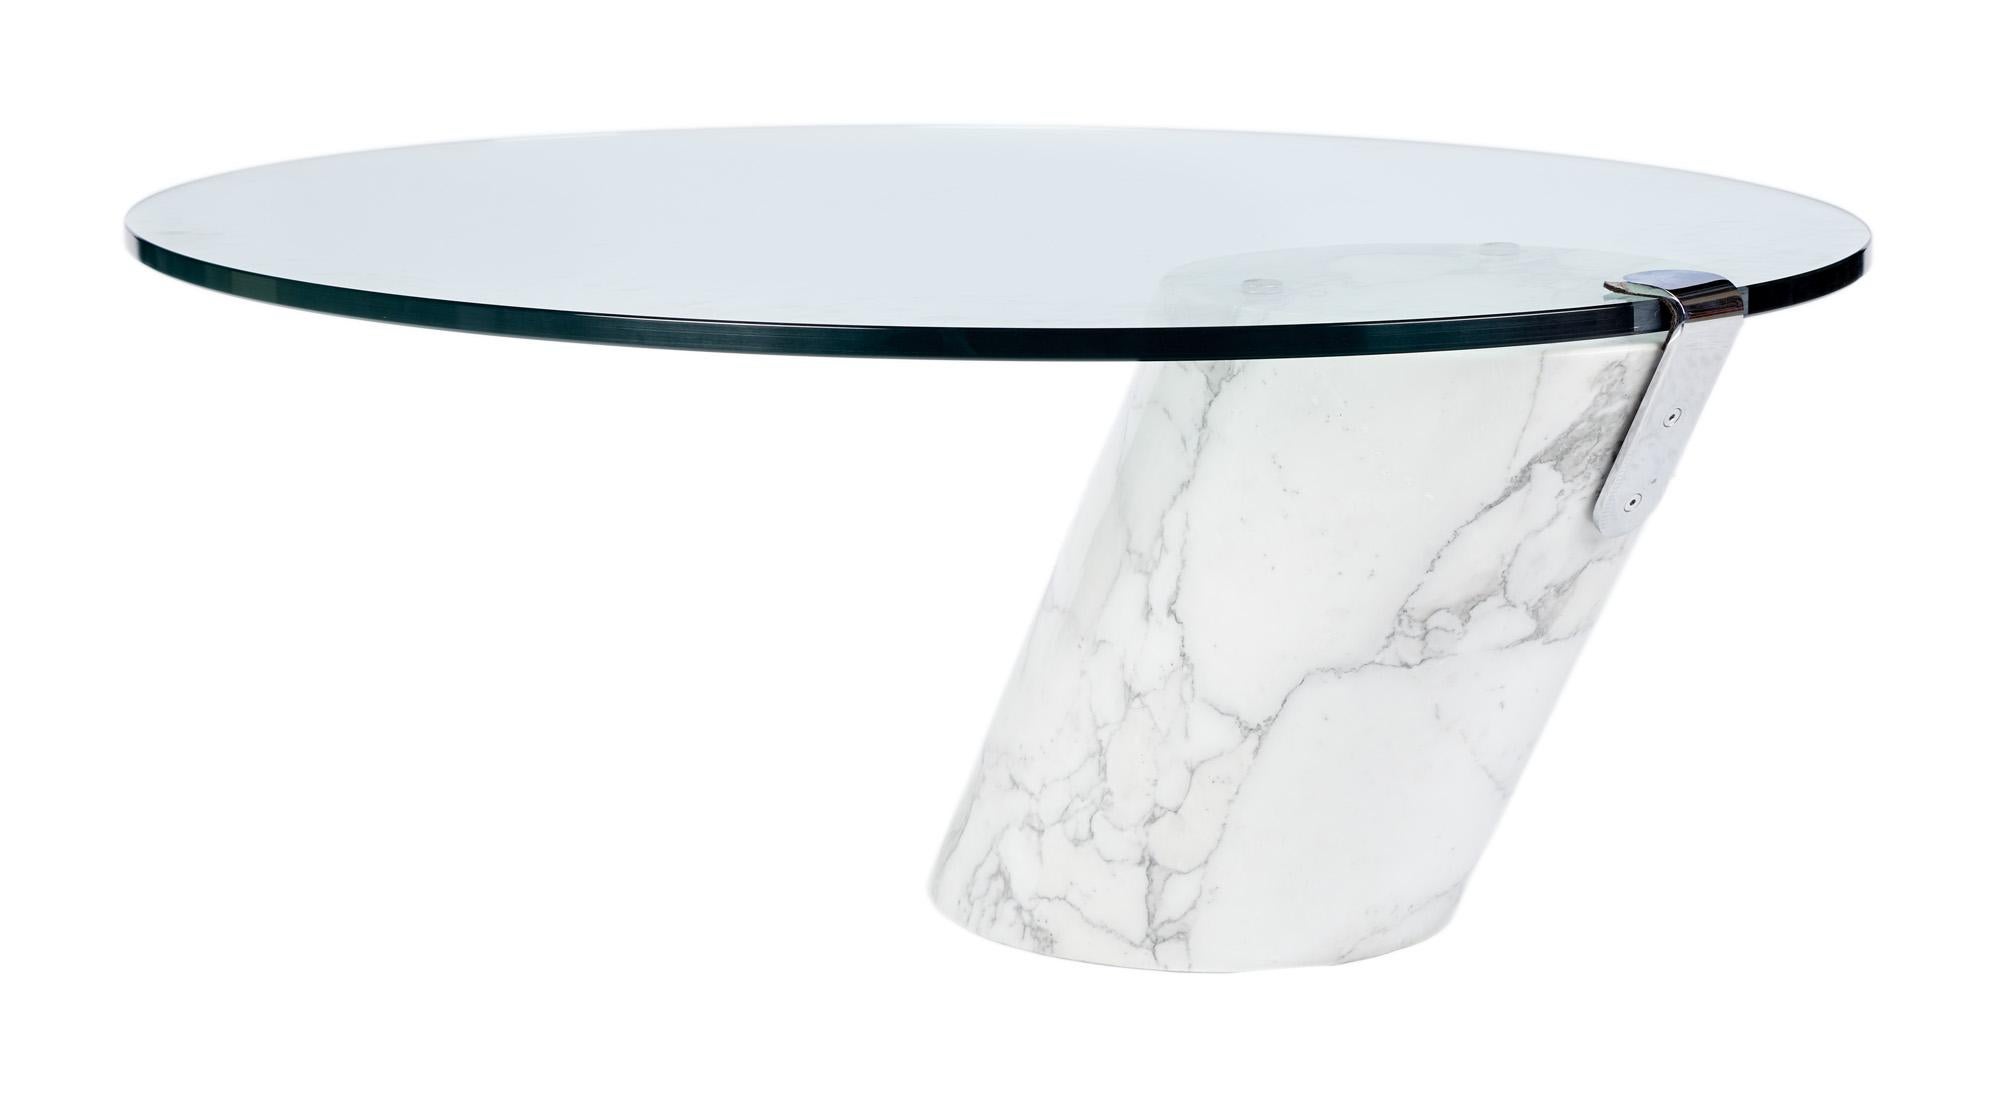 Beautiful vintage coffee table designed by Team Form for Ronald Schmitt in the 1970s.
The base of this table is made of solid marble, on which a thick oval glass top rests loosely.
The top is held in place by a metal lip that gives this table its